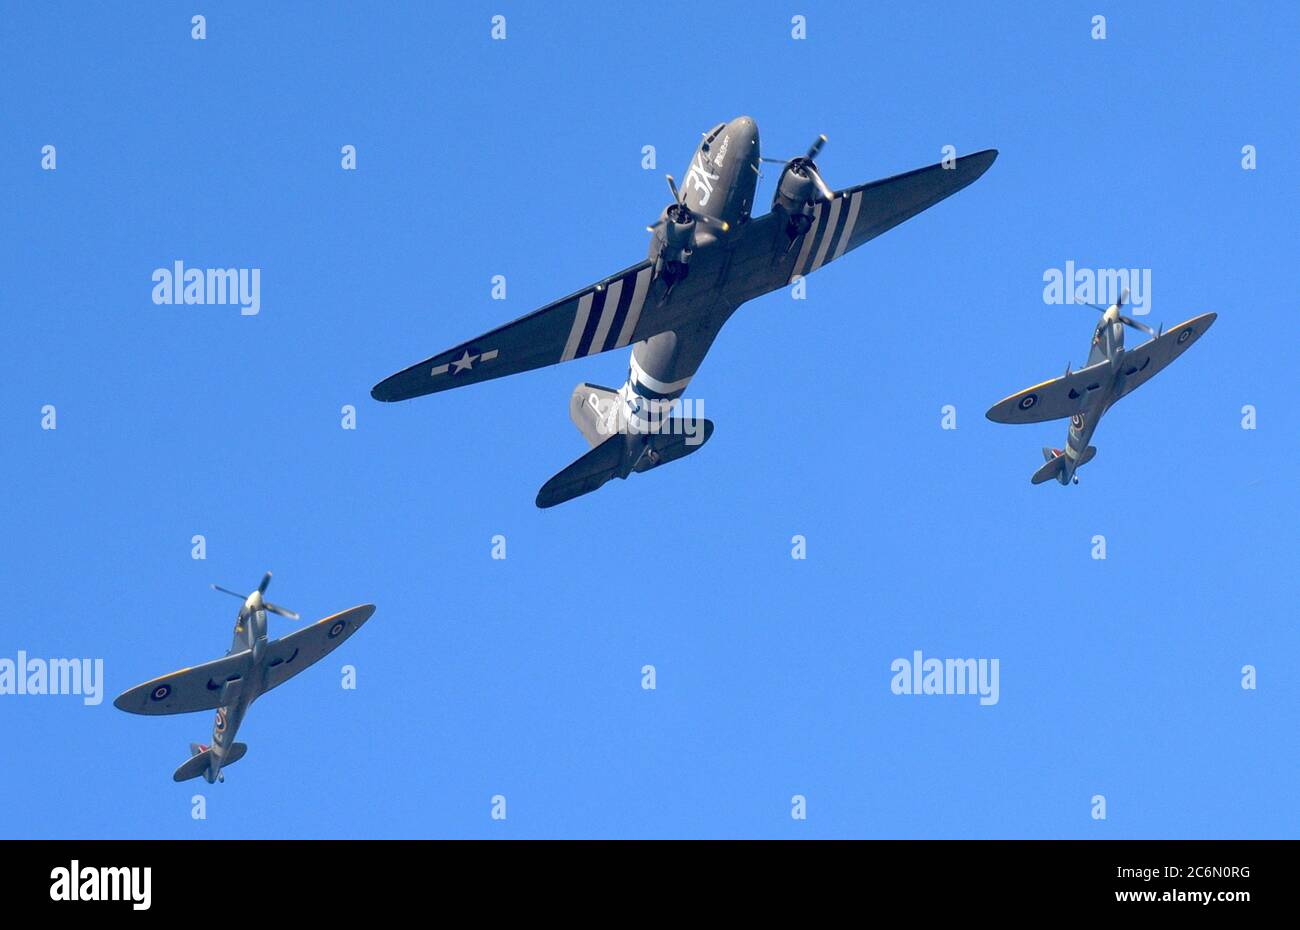 A fly pass of two spitfires and a C-47 Dakota as part of Remembrance Day Sunday 2019 tributes to the fallen of WWI and WWII. Stock Photo